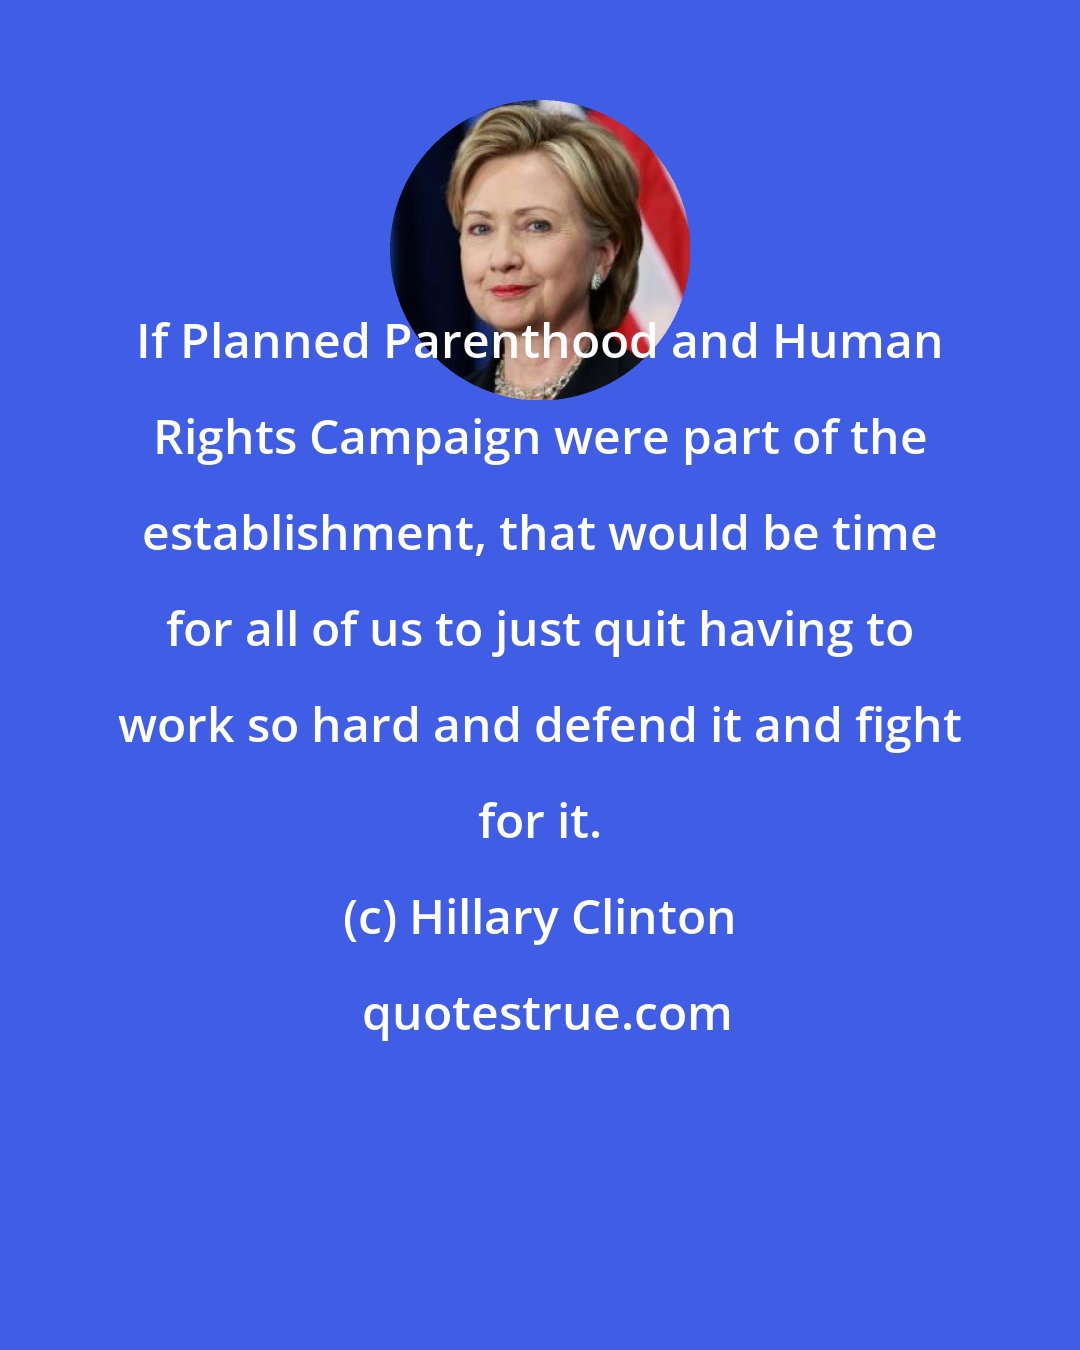 Hillary Clinton: If Planned Parenthood and Human Rights Campaign were part of the establishment, that would be time for all of us to just quit having to work so hard and defend it and fight for it.